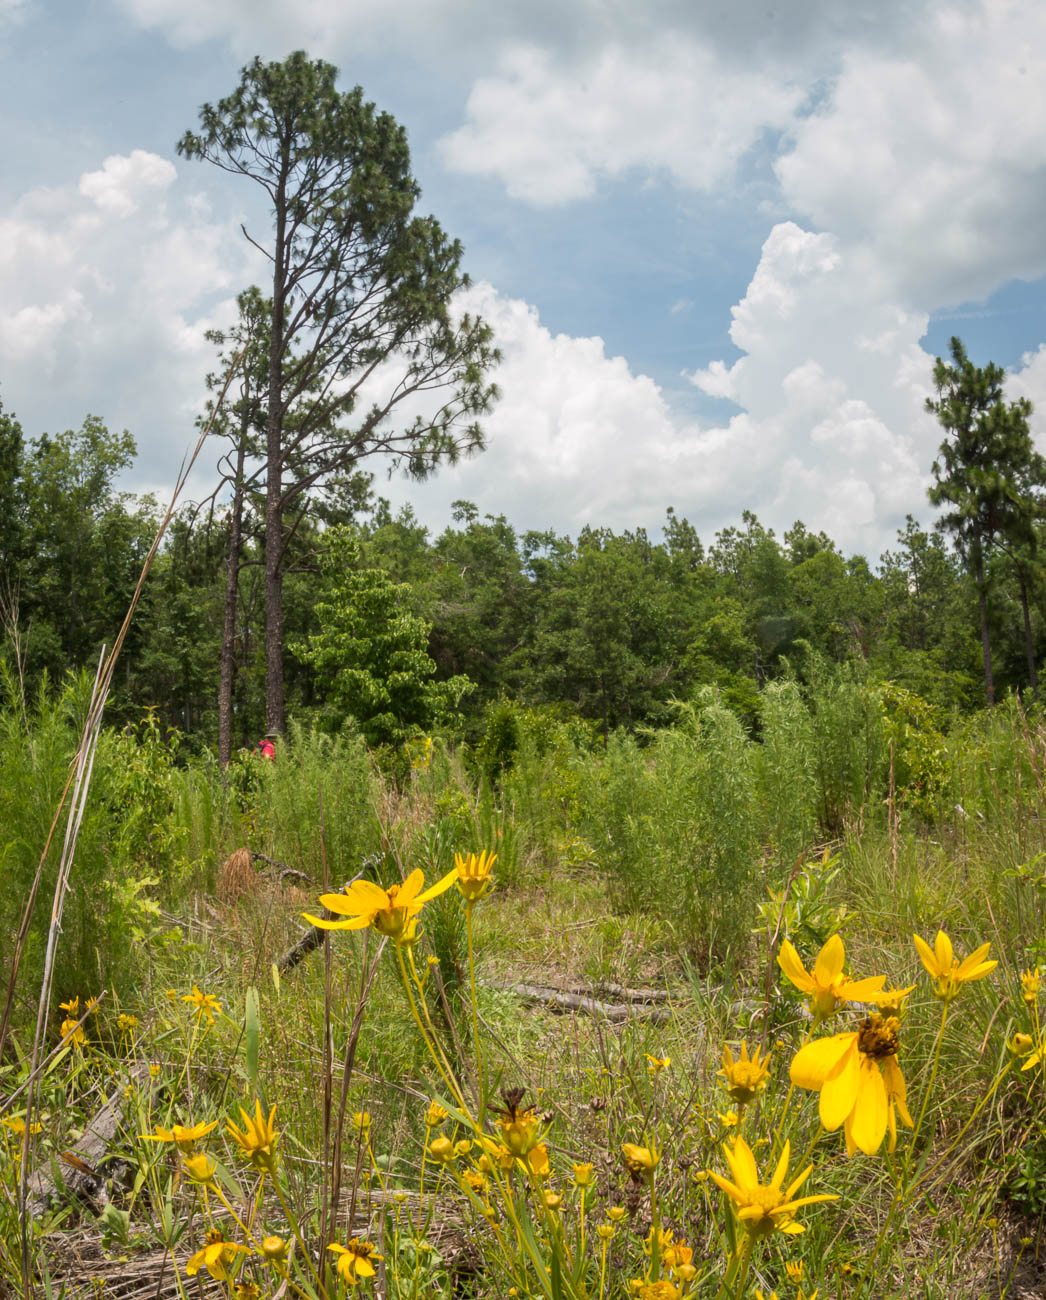 Yellow flowers are in the foreground of this photograph, showing other green vegetation on the ground and longleaf pines in the background.